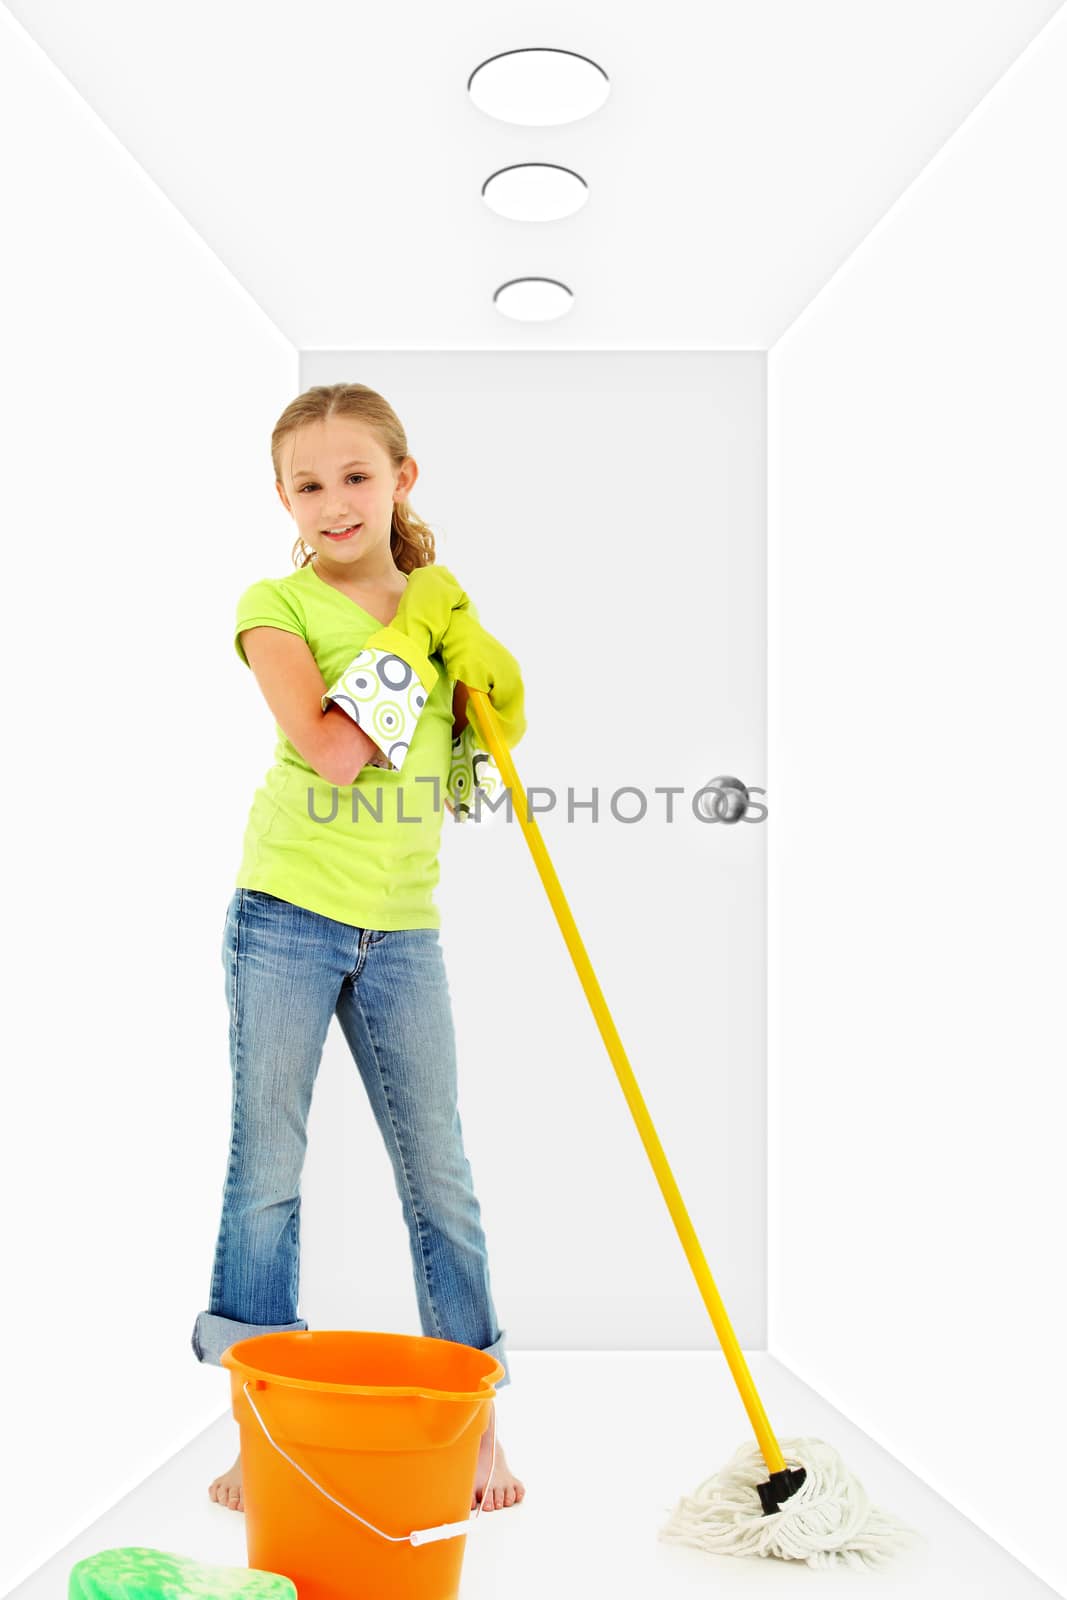 Child with mop bucket sponge in white hallway cleaning.